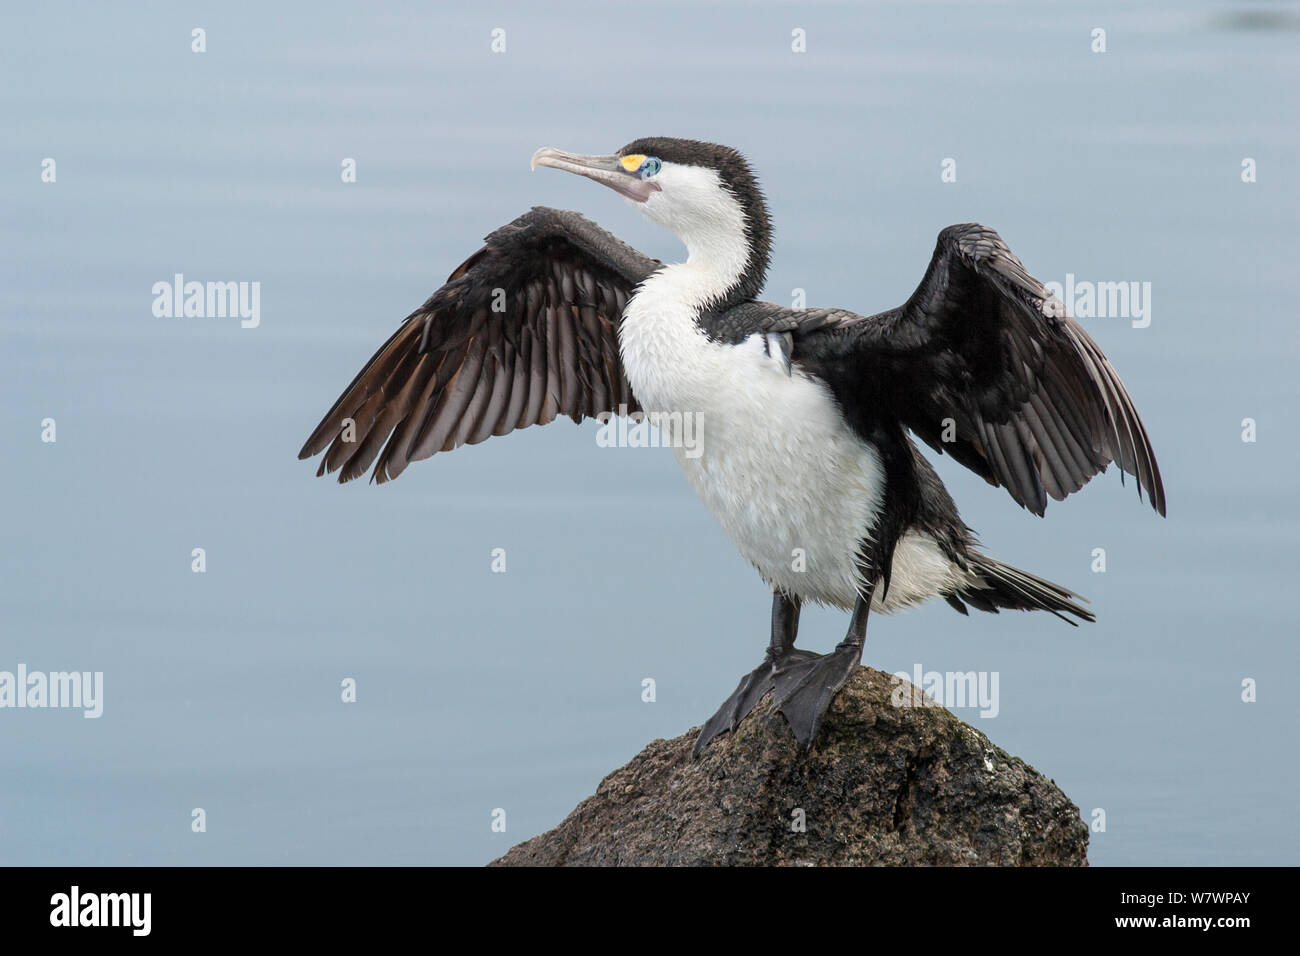 Pied cormorant (Phalacrocorax varius) standing on a rock with wings outspread drying. Christchurch, Canterbury, New Zealand, December. Stock Photo